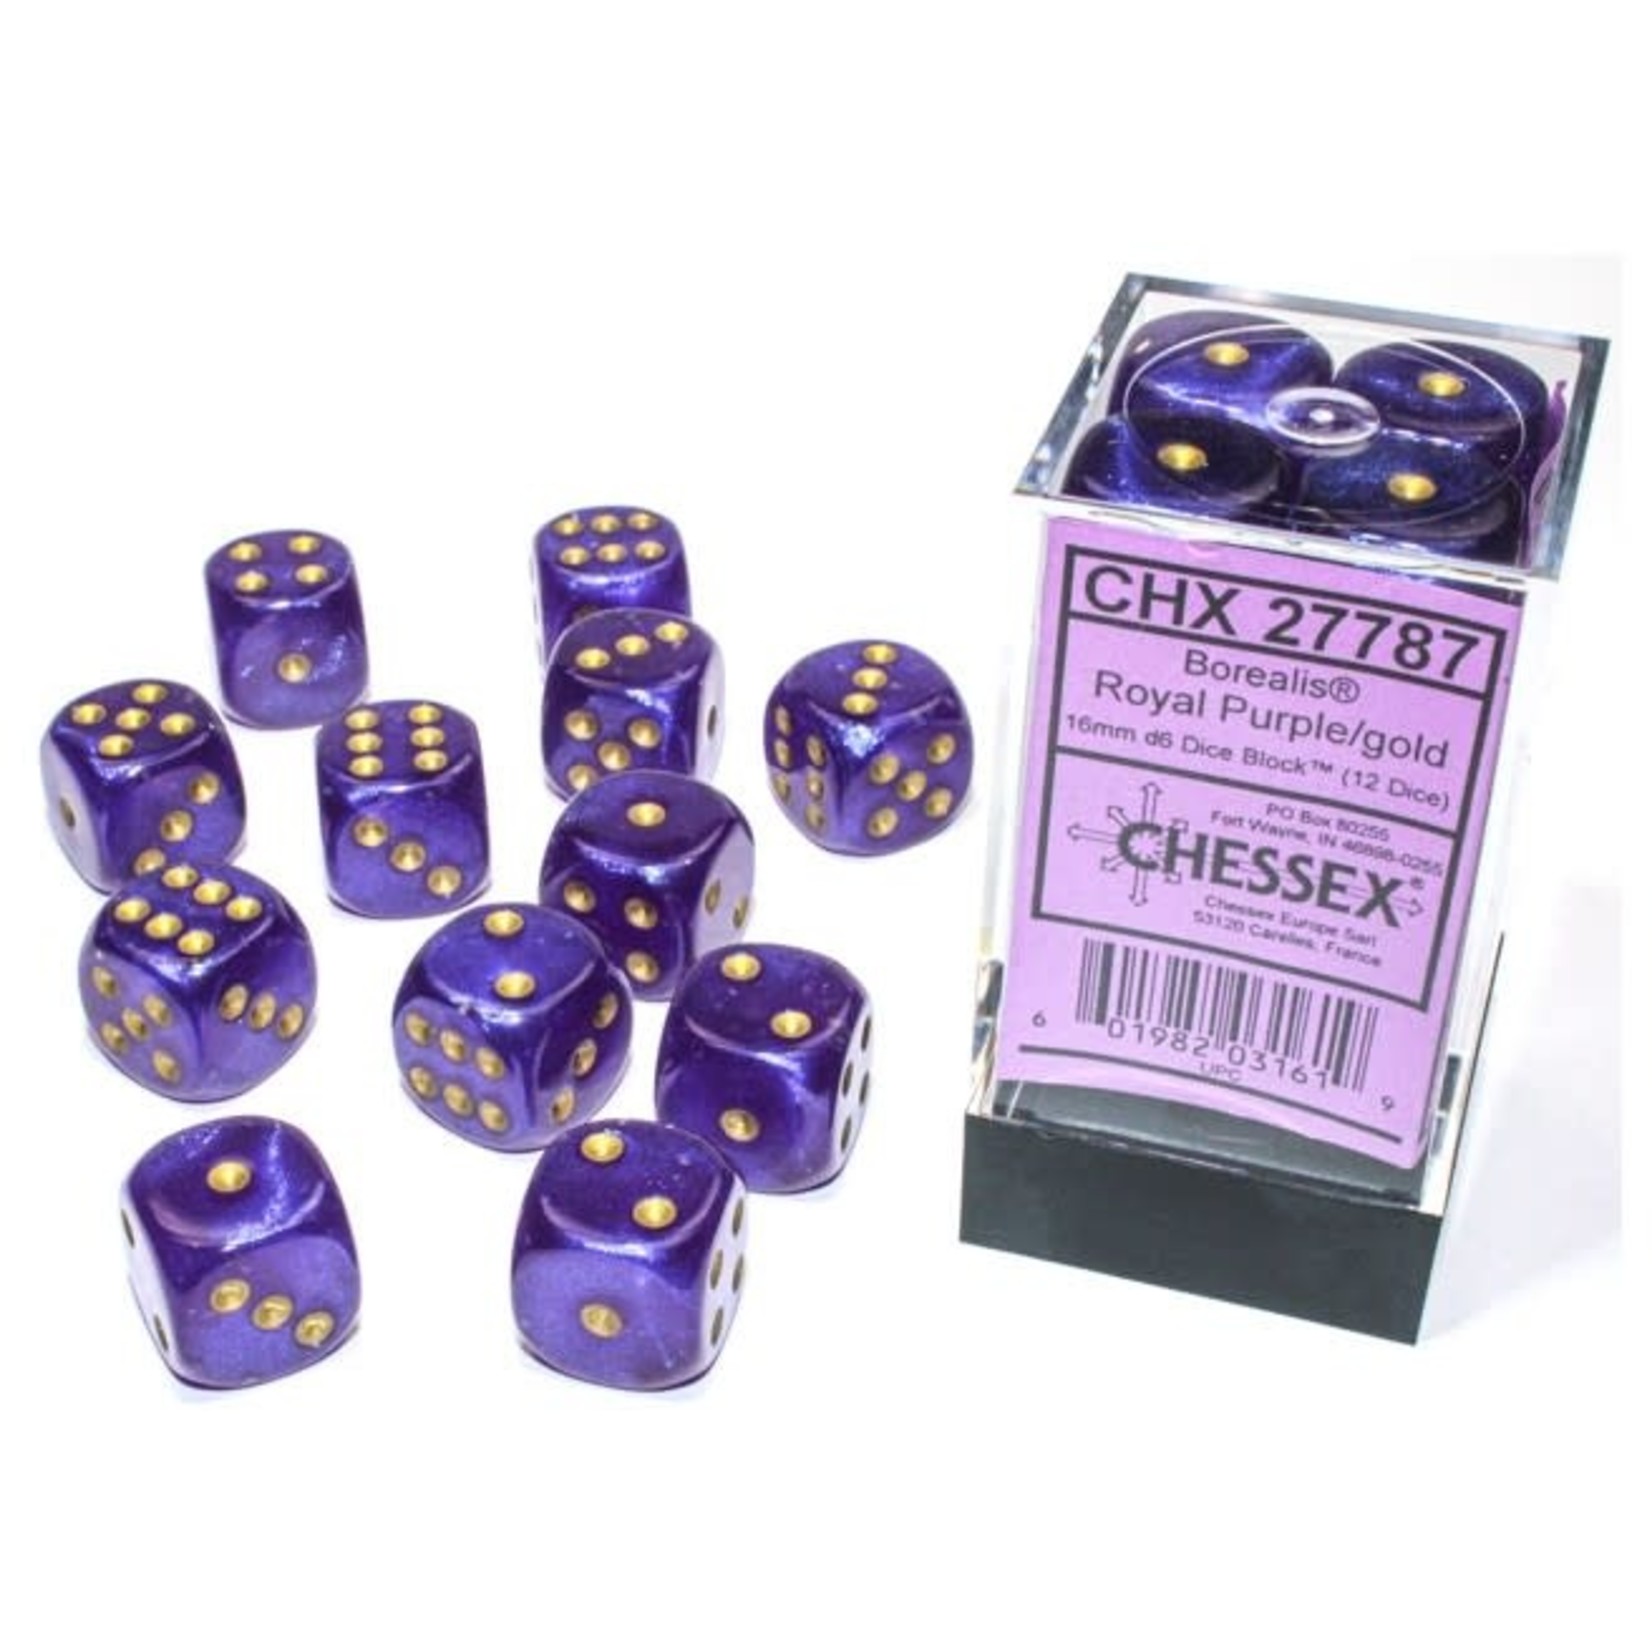 Chessex Chessex Borealis Royal Purple with Gold Luminary 16 mm d6 12 die set